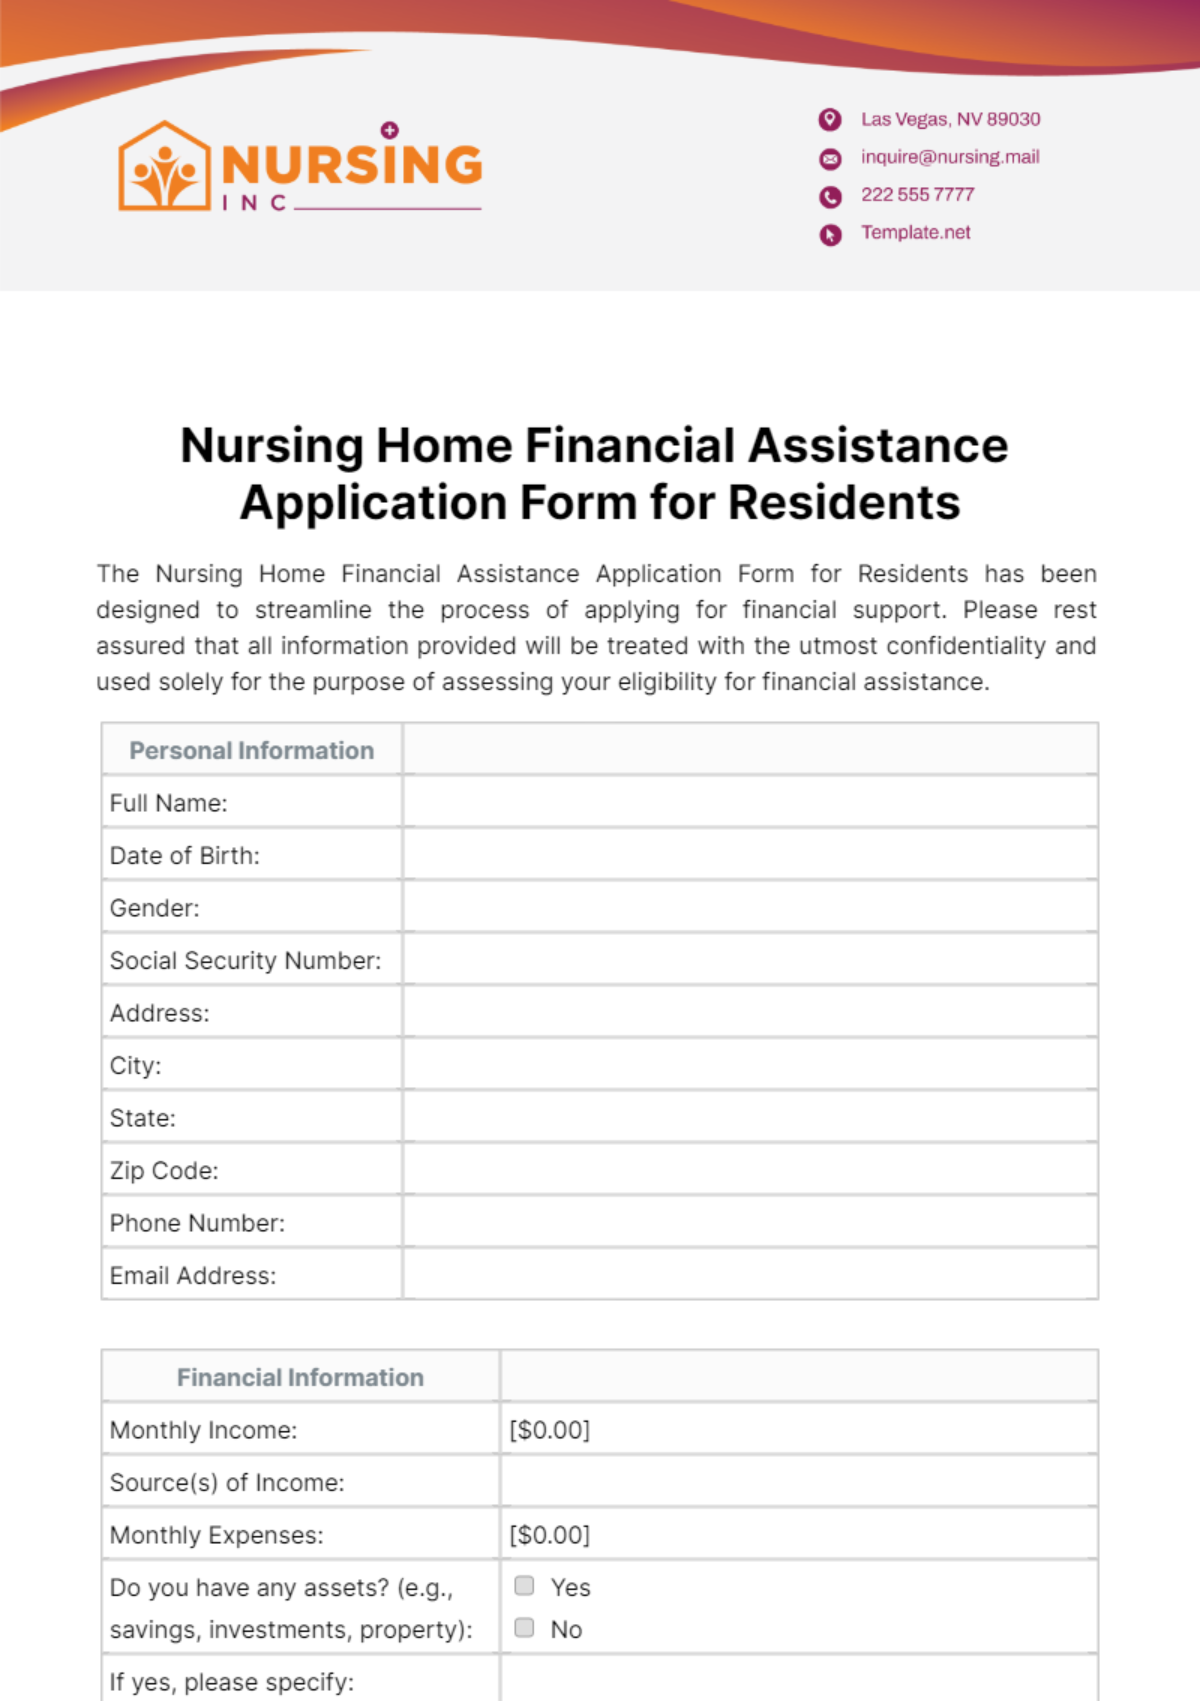 Nursing Home Financial Assistance Application Form for Residents Template